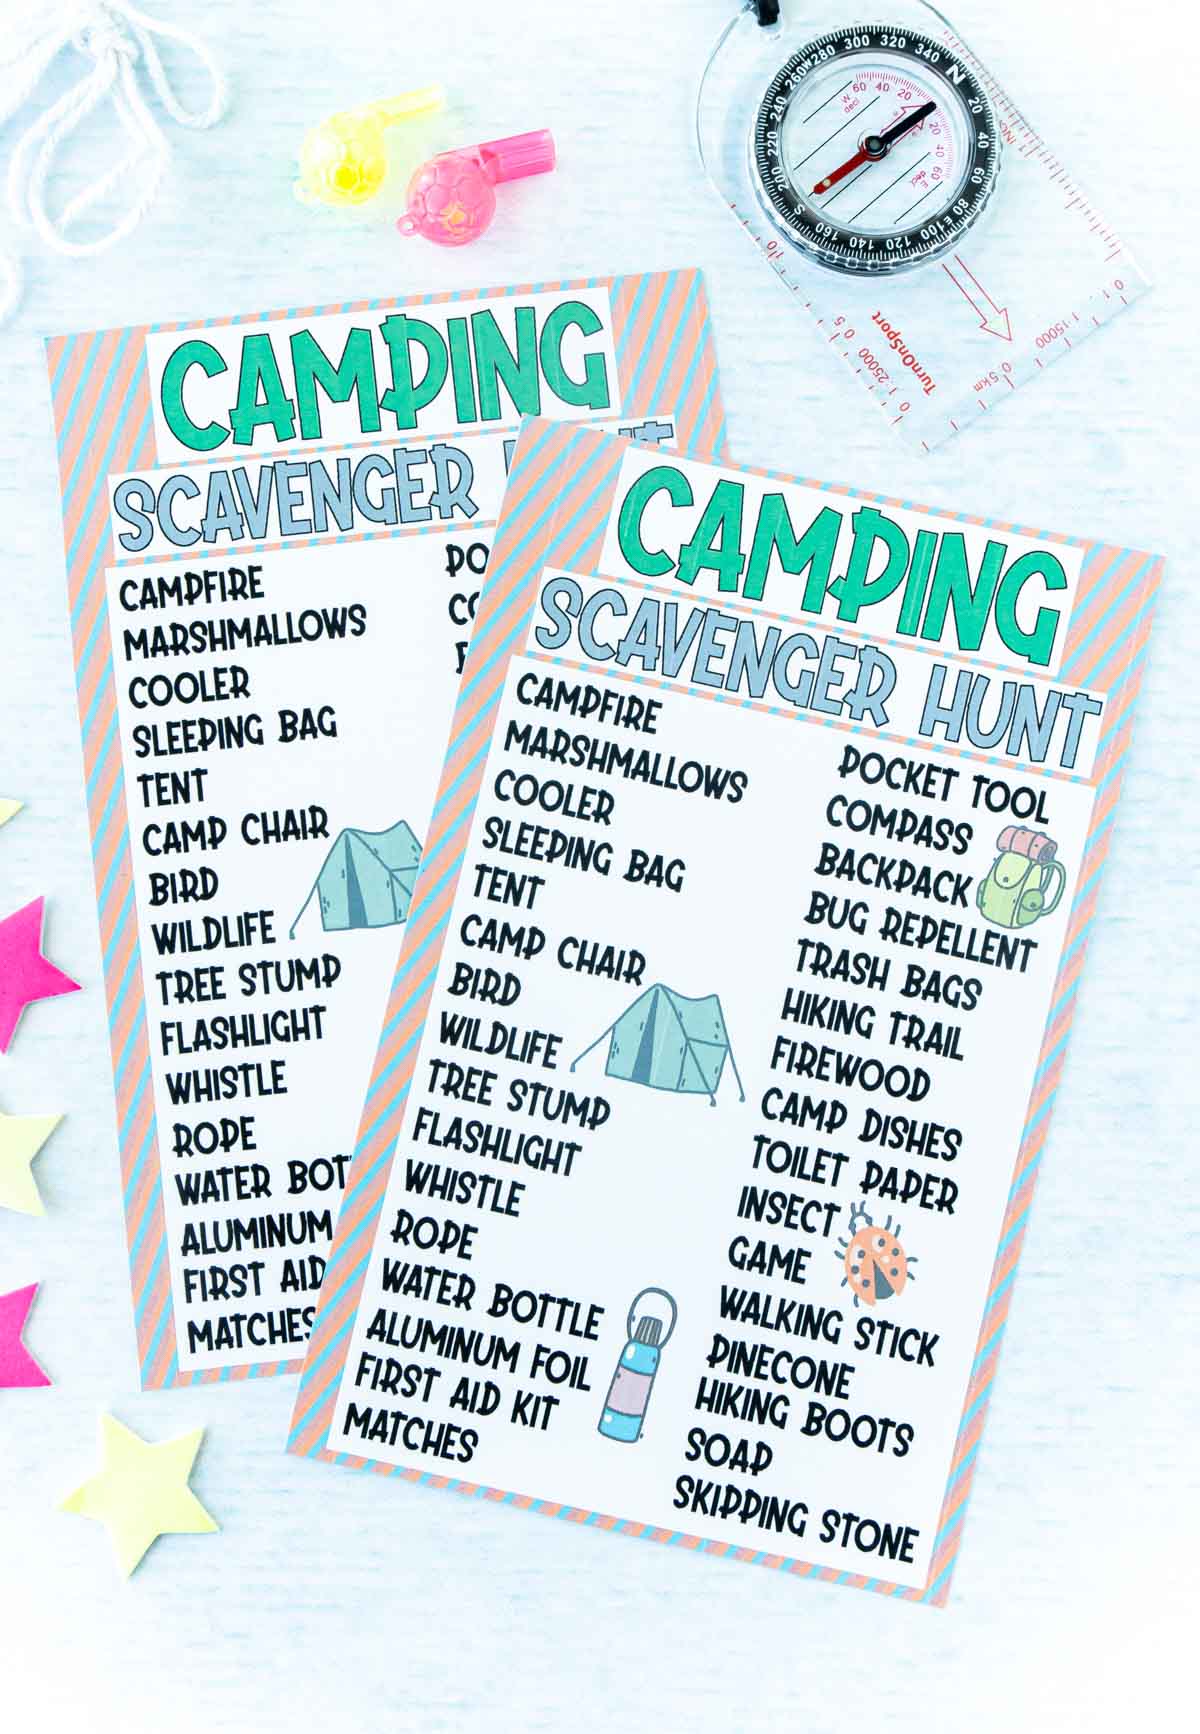 Camping Fun - 9 Engaging Activities For The Whole Family